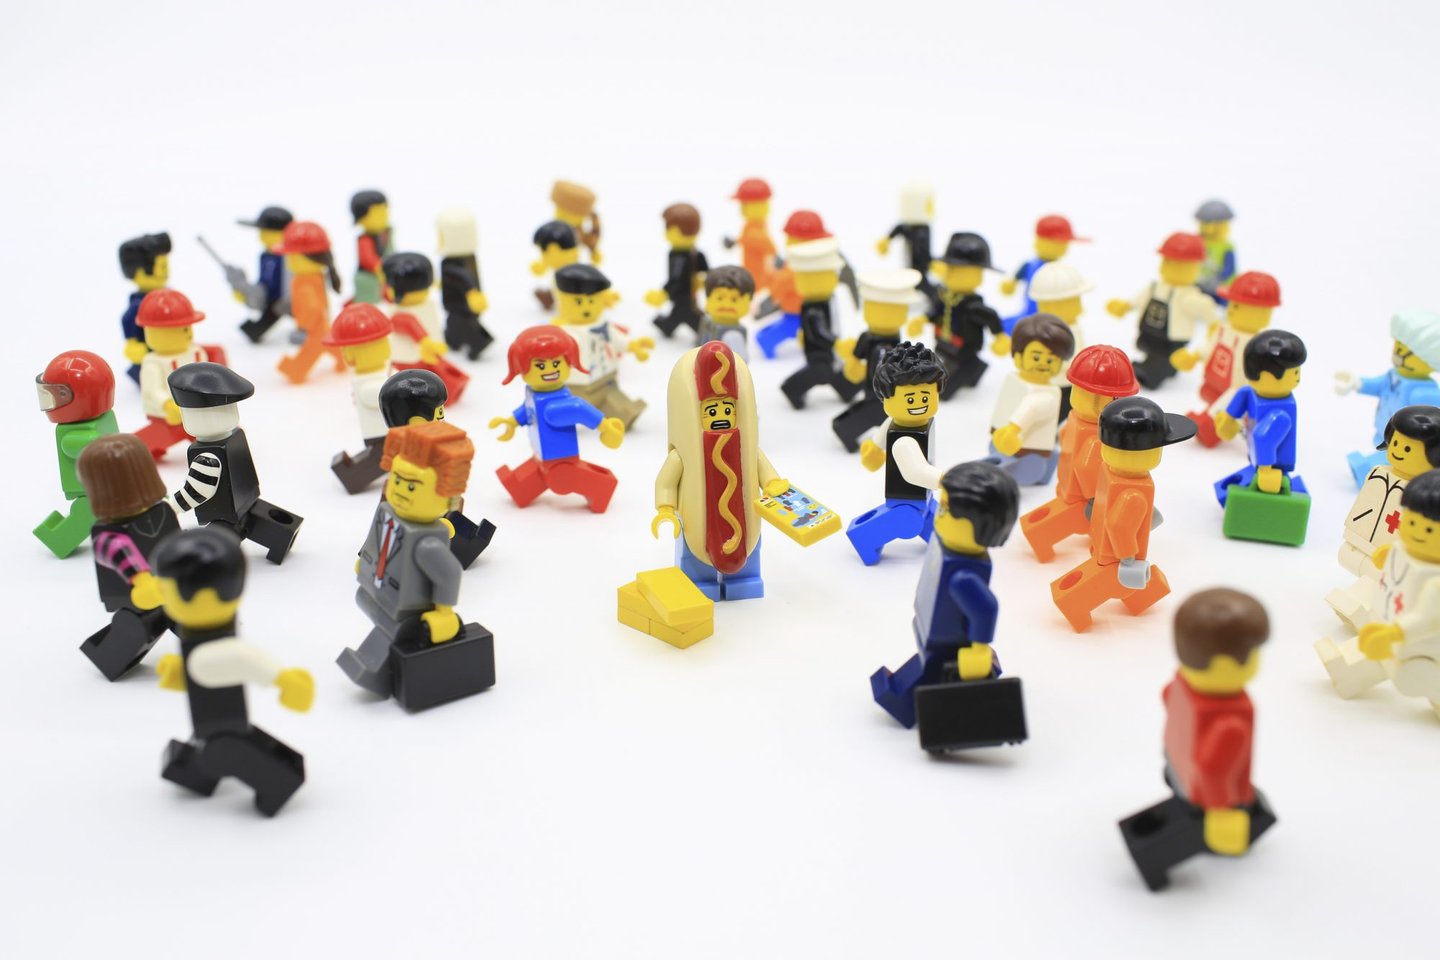 Large Group Of People, Busy, Hotdogging, Nerd, Evil, Play, Flyer, Hot Dog, Sucking, Failure, Cool, Rudeness, Crowded, Business, Urban Scene, Crowd, People, Street, City, Brochure, Toy, Lego, Minifigure, 